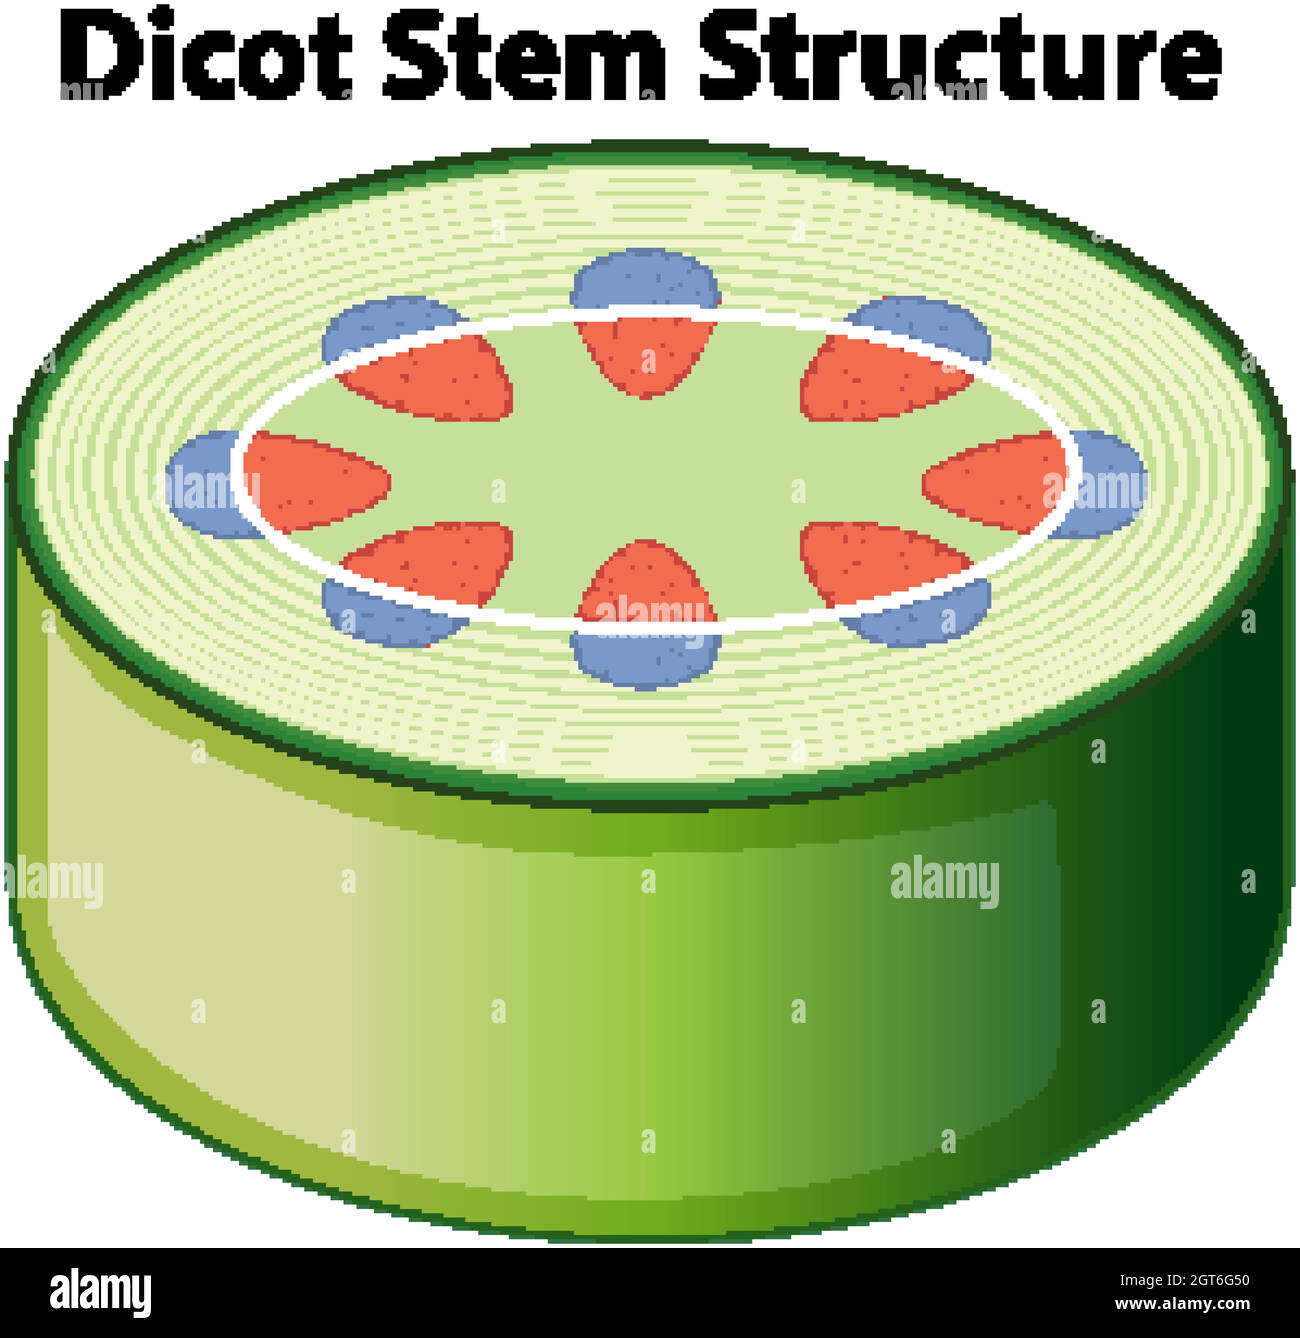 Diagram showing dicot stem structure Stock Vector